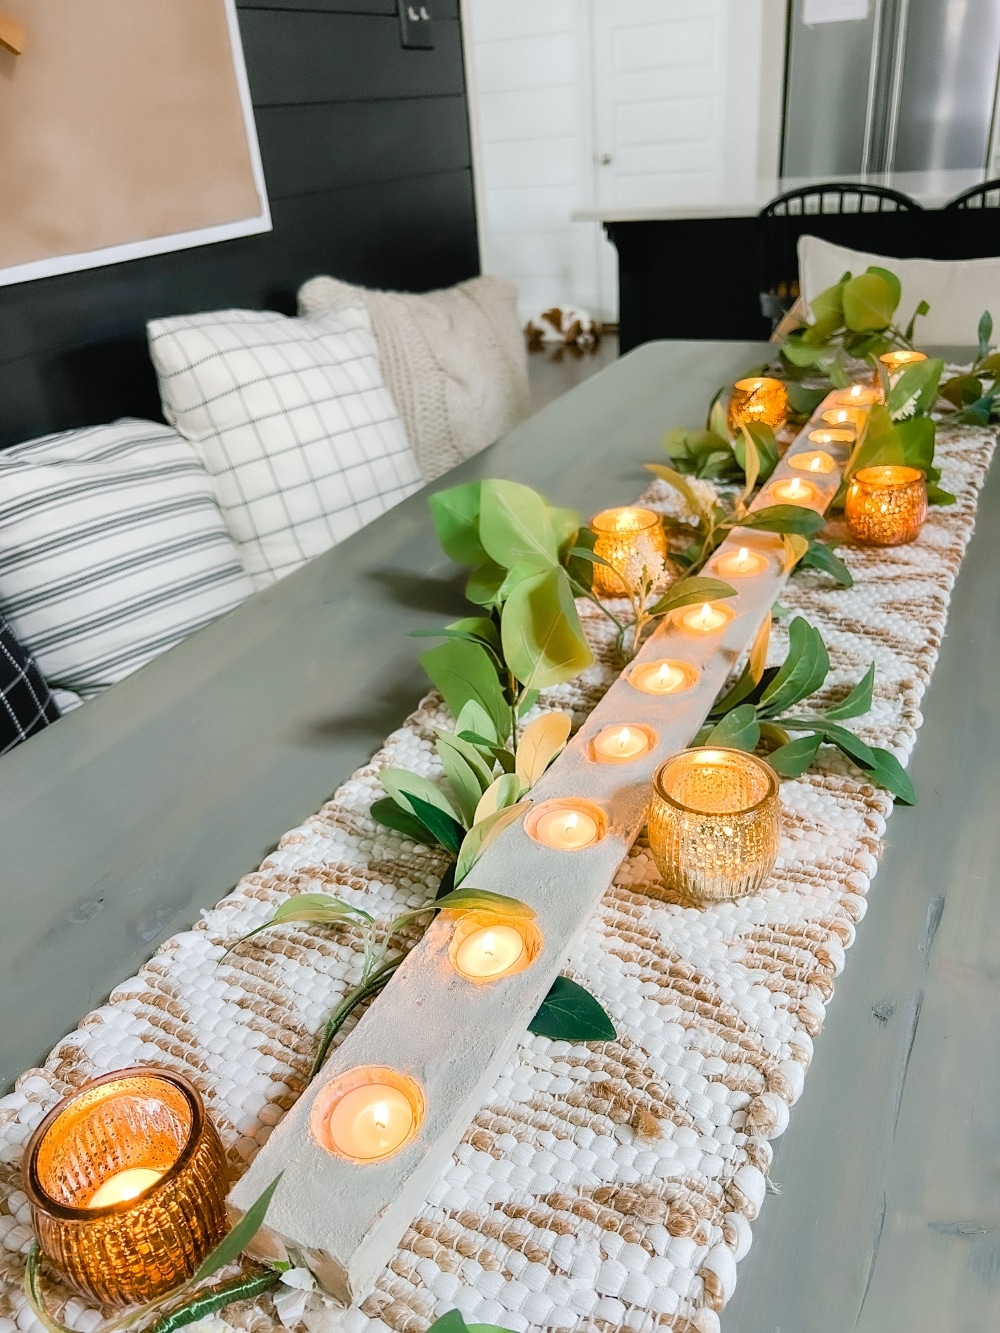 DIY Concrete Candle Holder. Use quick-set concrete mix to create a tea light candle holder in whatever size and shape you want for your home.